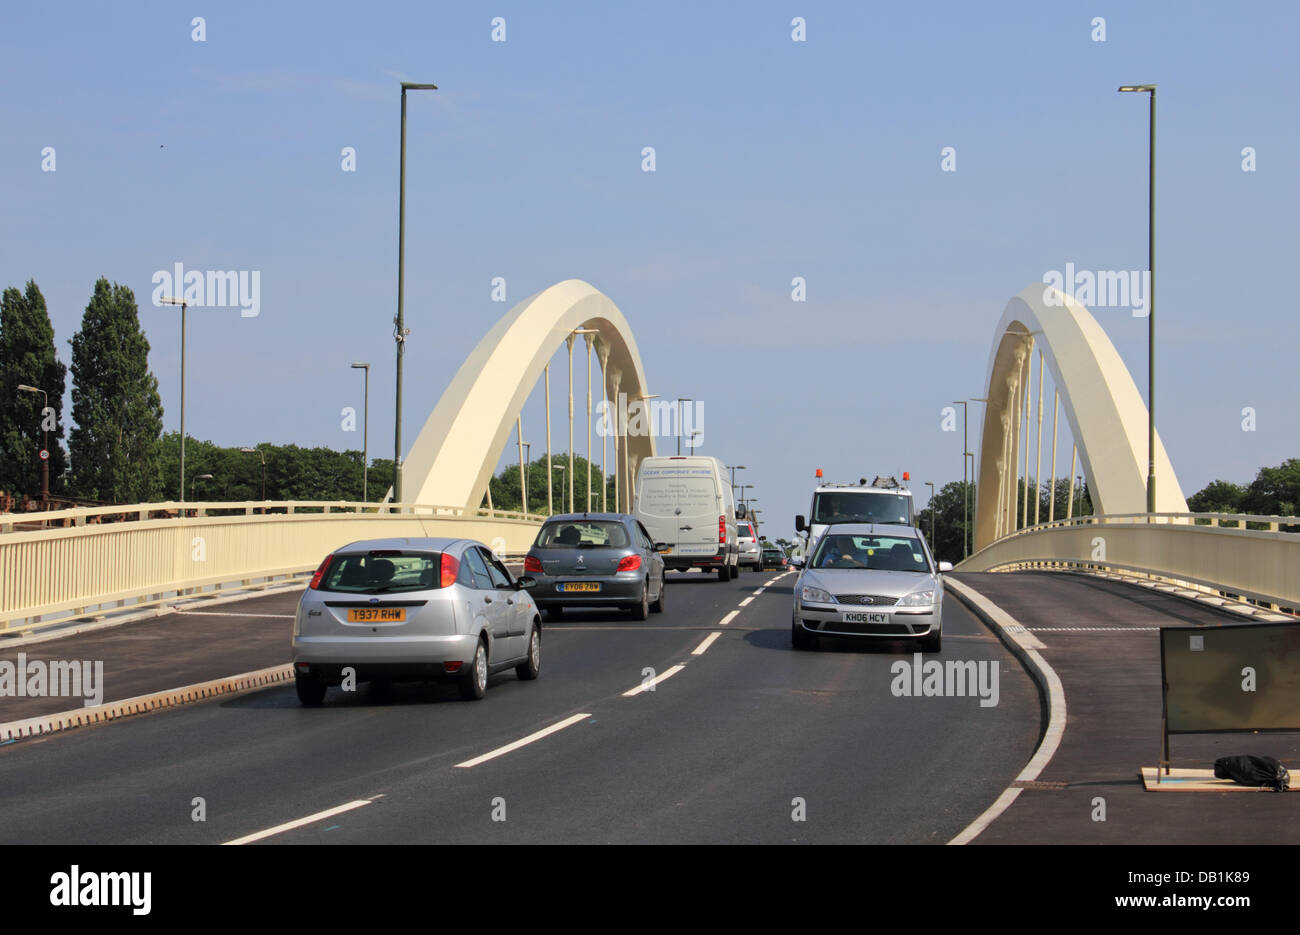 Walton on Thames, Surrey, England, UK. 22nd July, 2013. The first new road bridge across the River Thames for 20 years opened to vehicles today at 6am. It carries the A244 between Walton-on-Thames and Shepperton and has taken 18 months to construct. Credit:  Jubilee Images/Alamy Live News Stock Photo